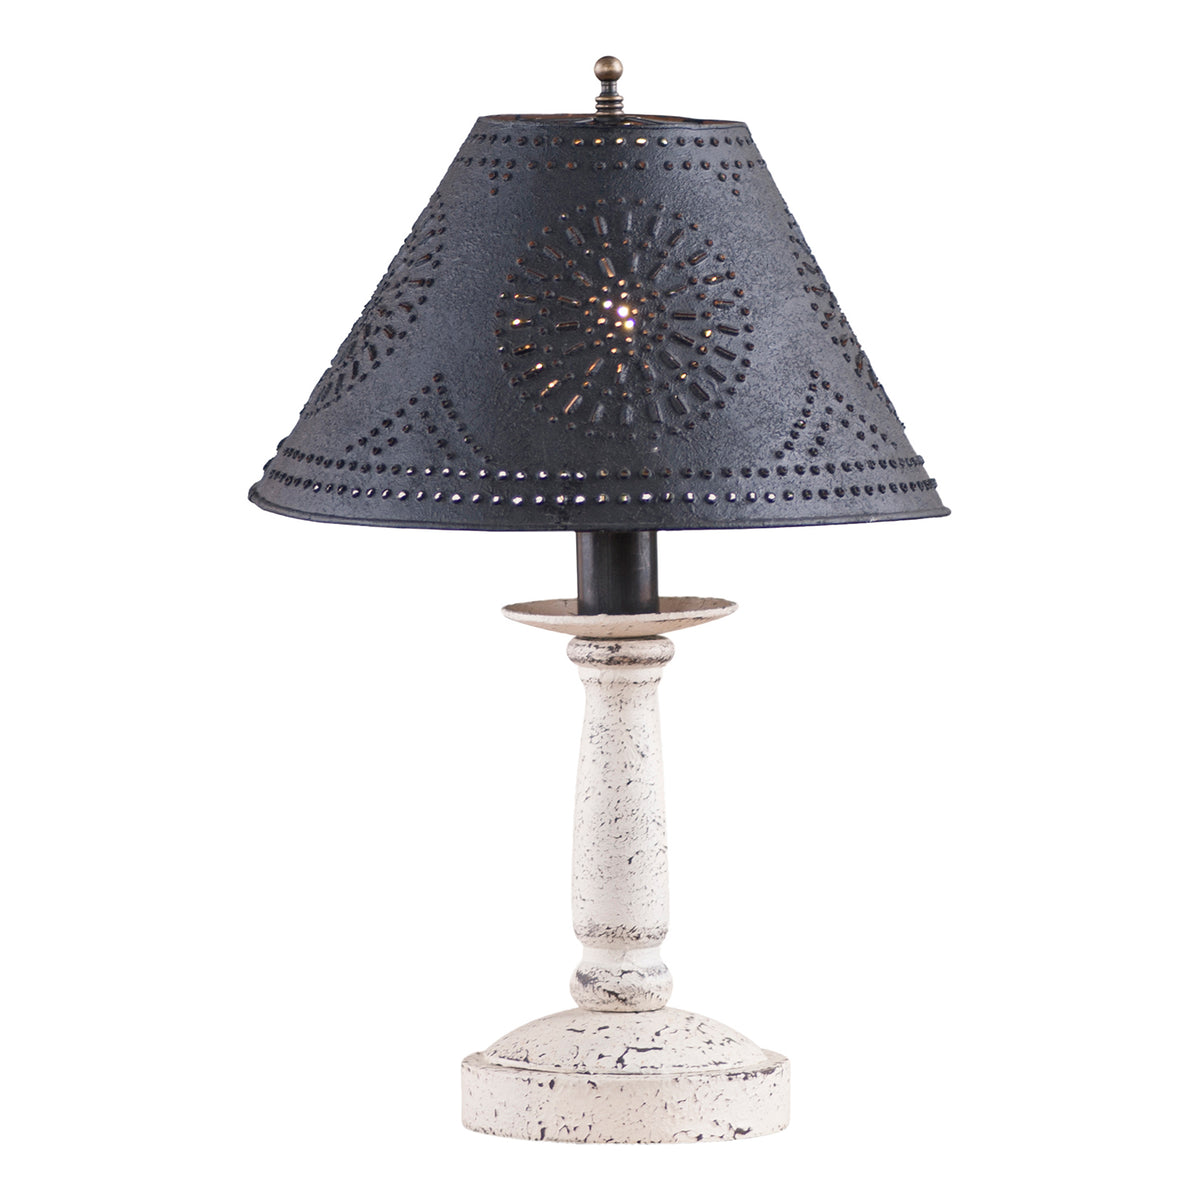 Butcher's Lamp in Americana White with Textured Black Tin Shade